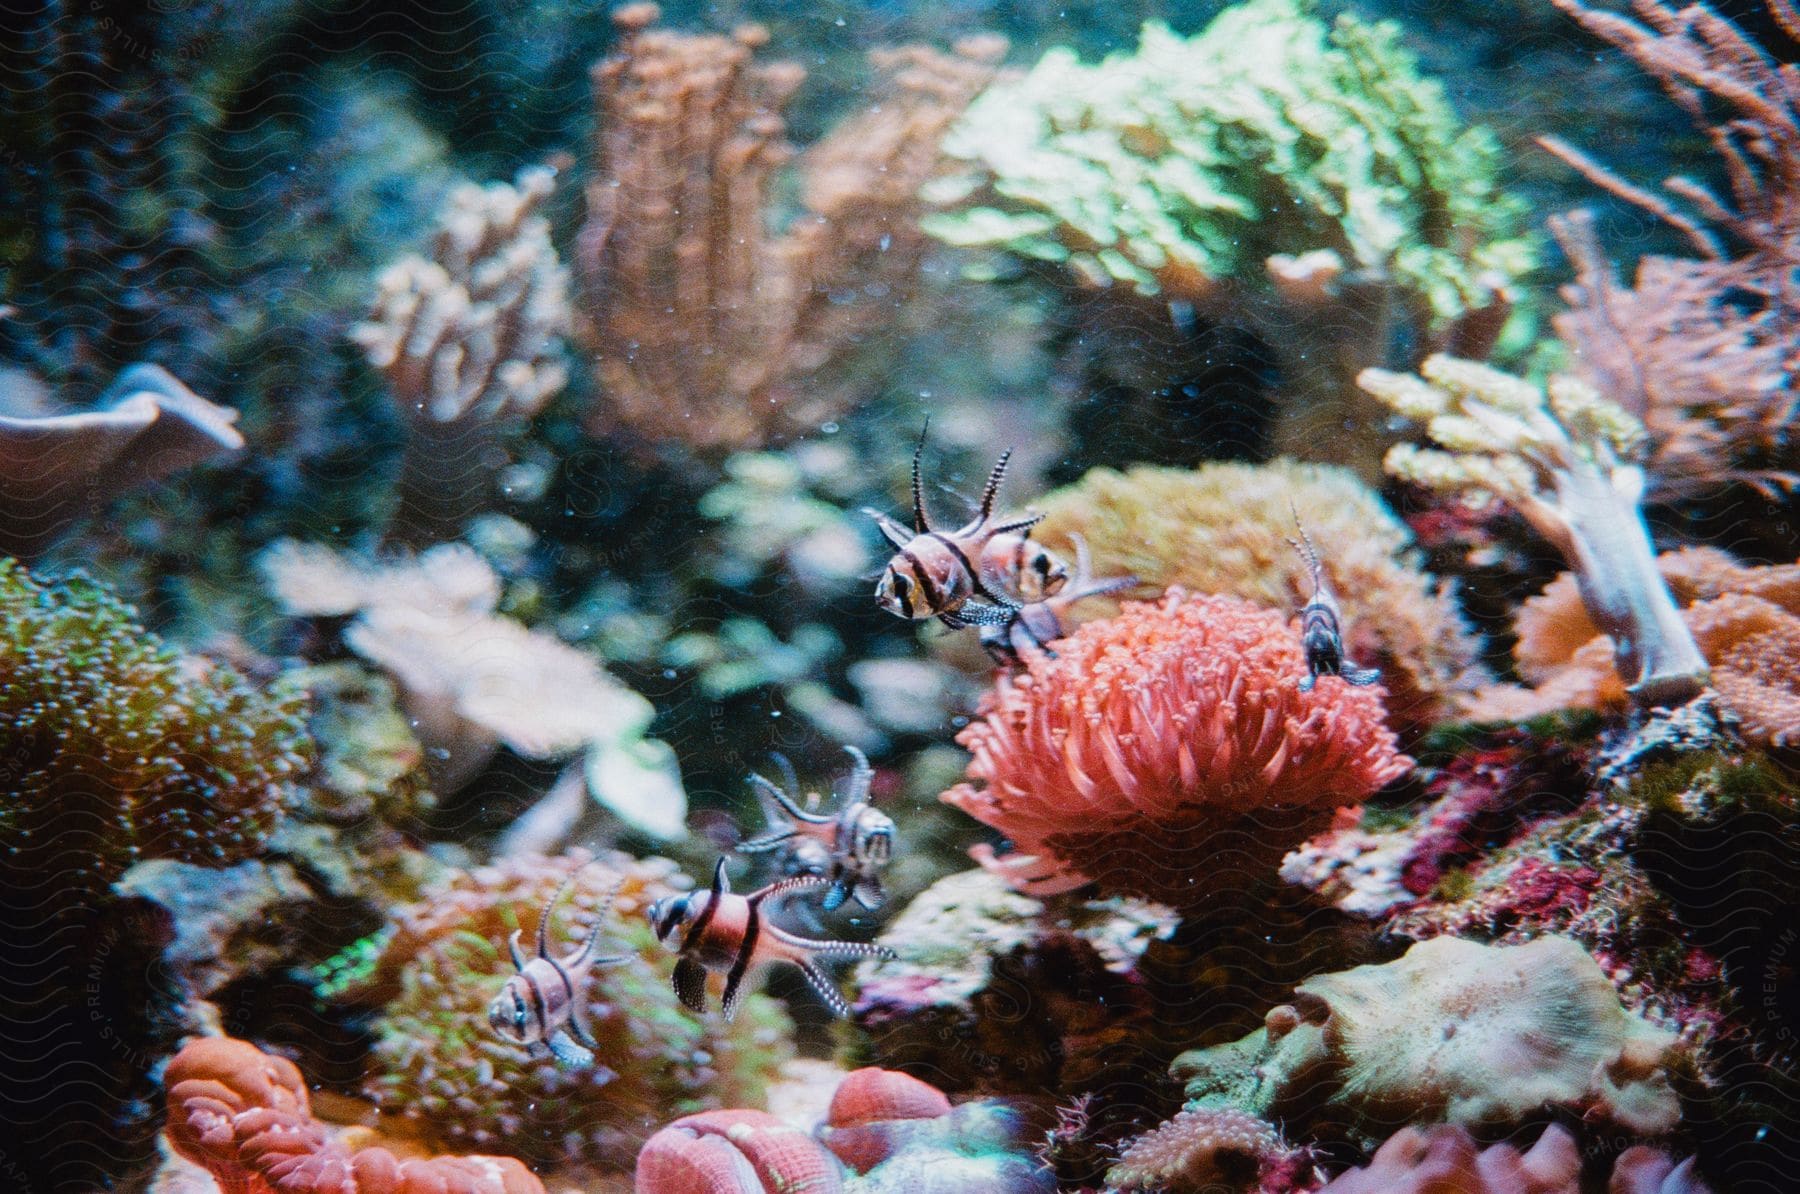 Many small fish are swimming near the reef.